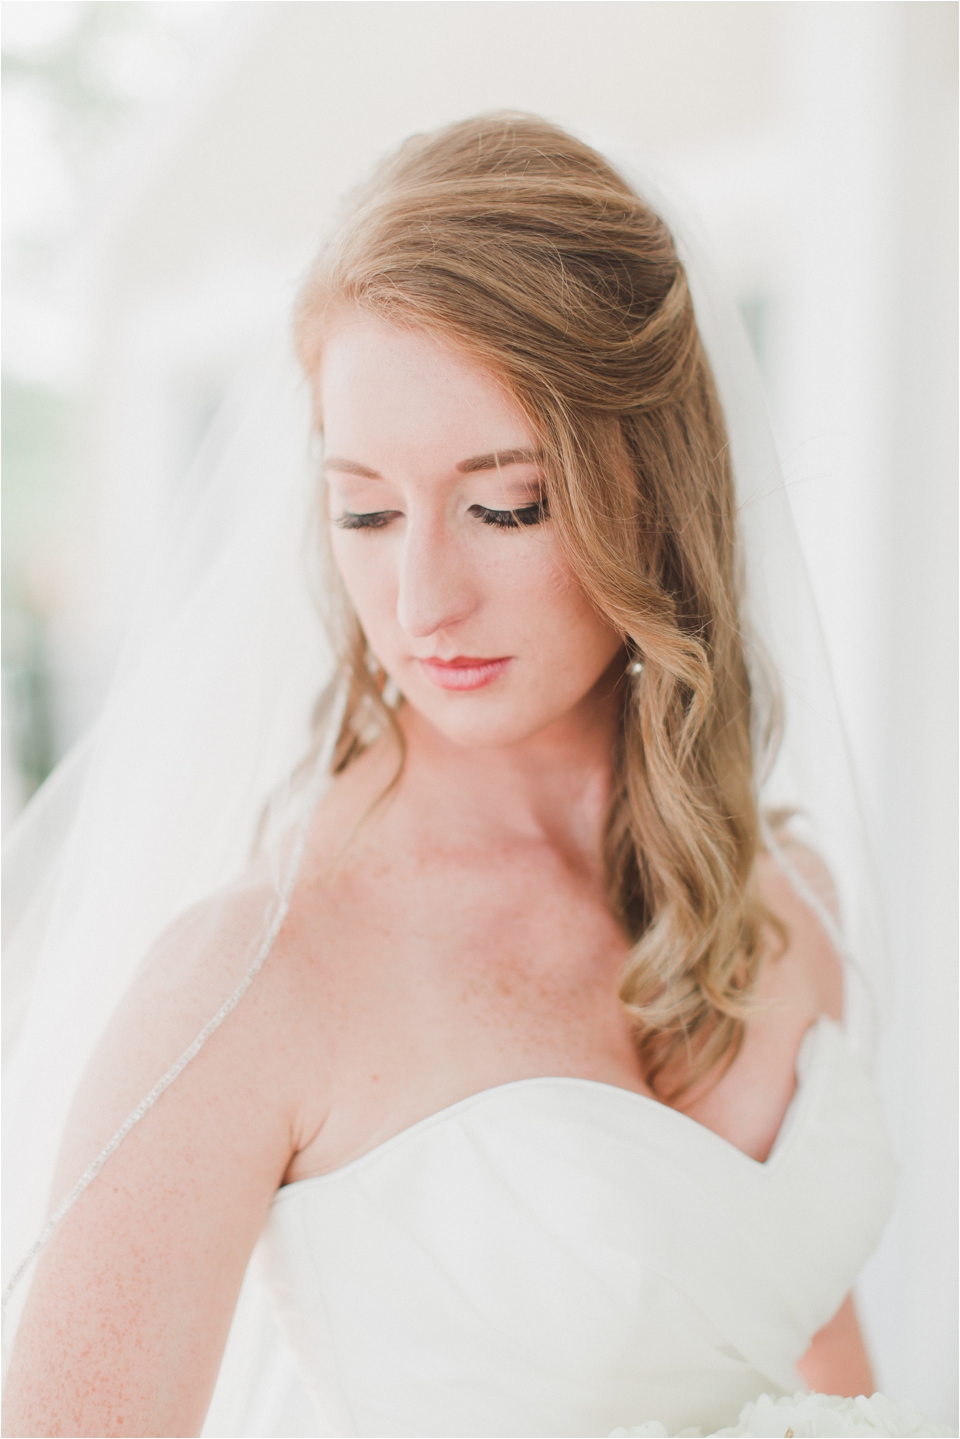 Jacob and Katie - Annamarie Akins Photography | Virginia and ...